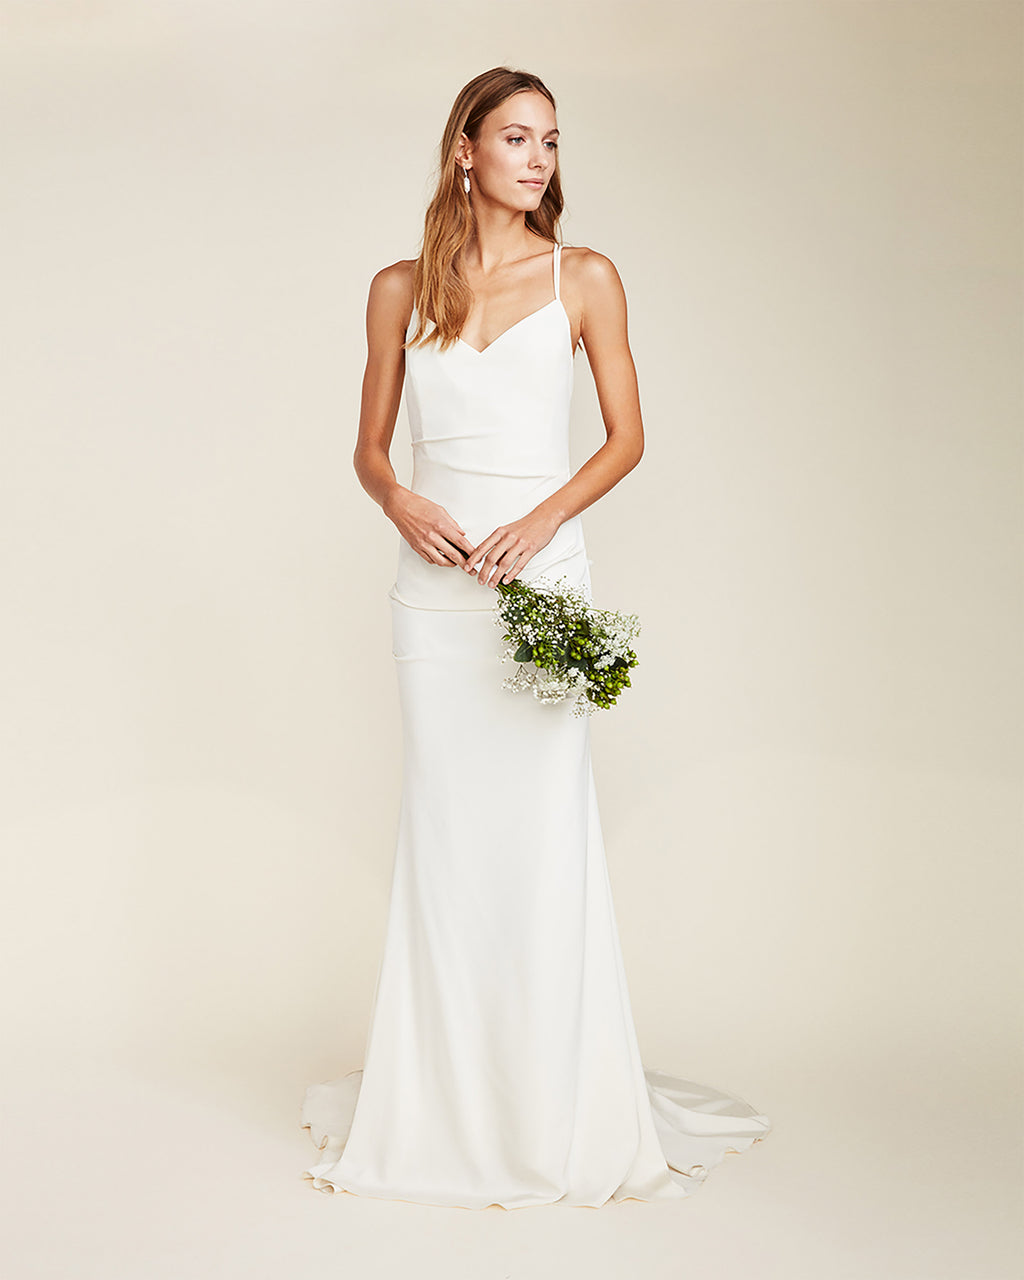 Bridal Gowns | Nicole Miller